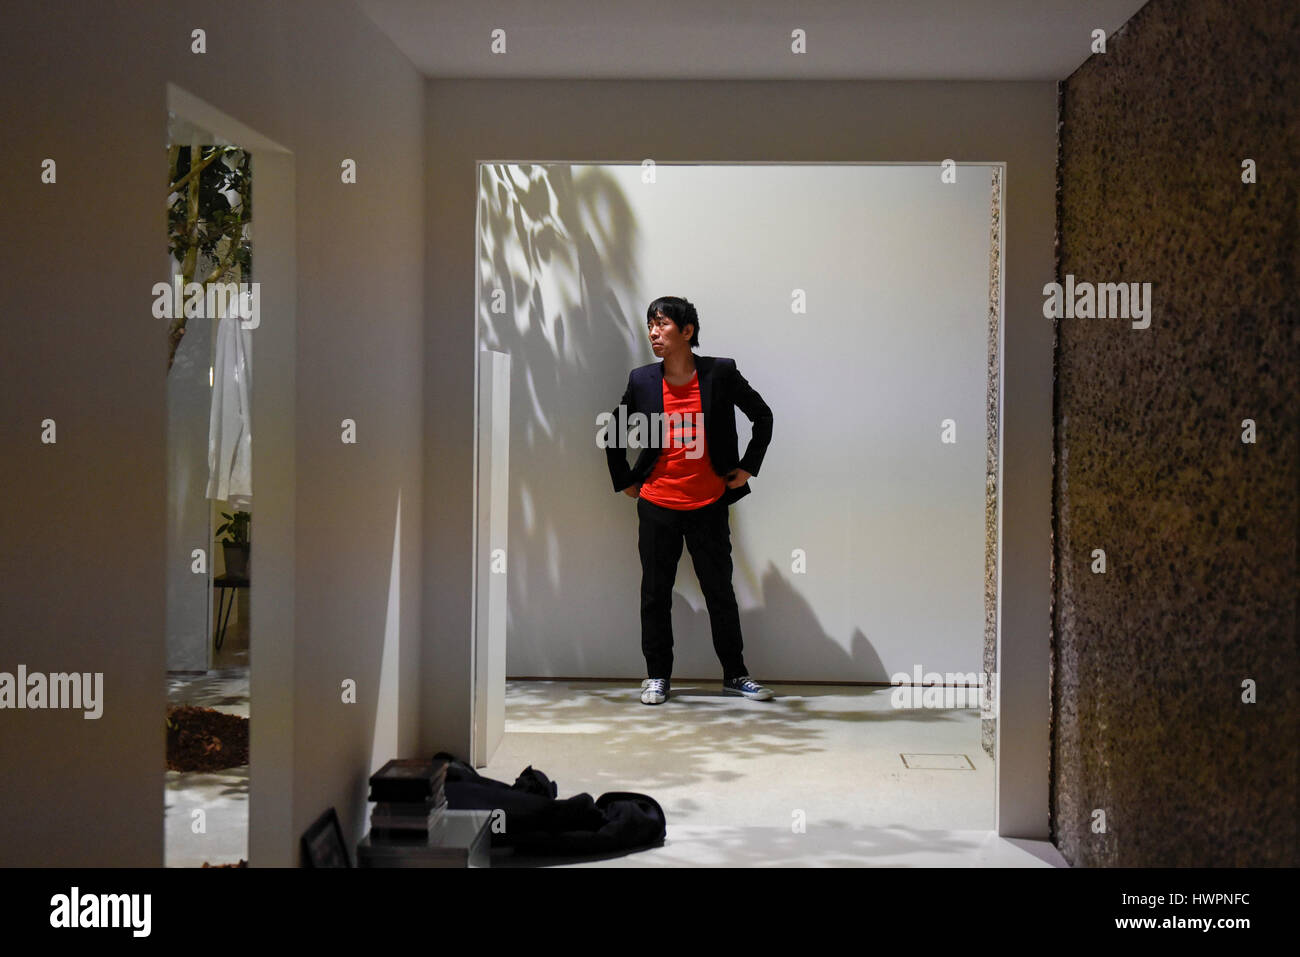 London, UK.  22 March 2017.  Pritzker-prize winning architect Ryue Nishizawa is seen inside a full size recreation of his Moriyama House, 2005.  Preview at the Barbican Centre of 'The Japanese House: Architecture and Life after 1945', the first major UK exhibition to focus on Japanese domestic architecture from the end of the Second World War to now.  The exhibition features designs from over 40 architects. Credit: Stephen Chung / Alamy Live News Stock Photo